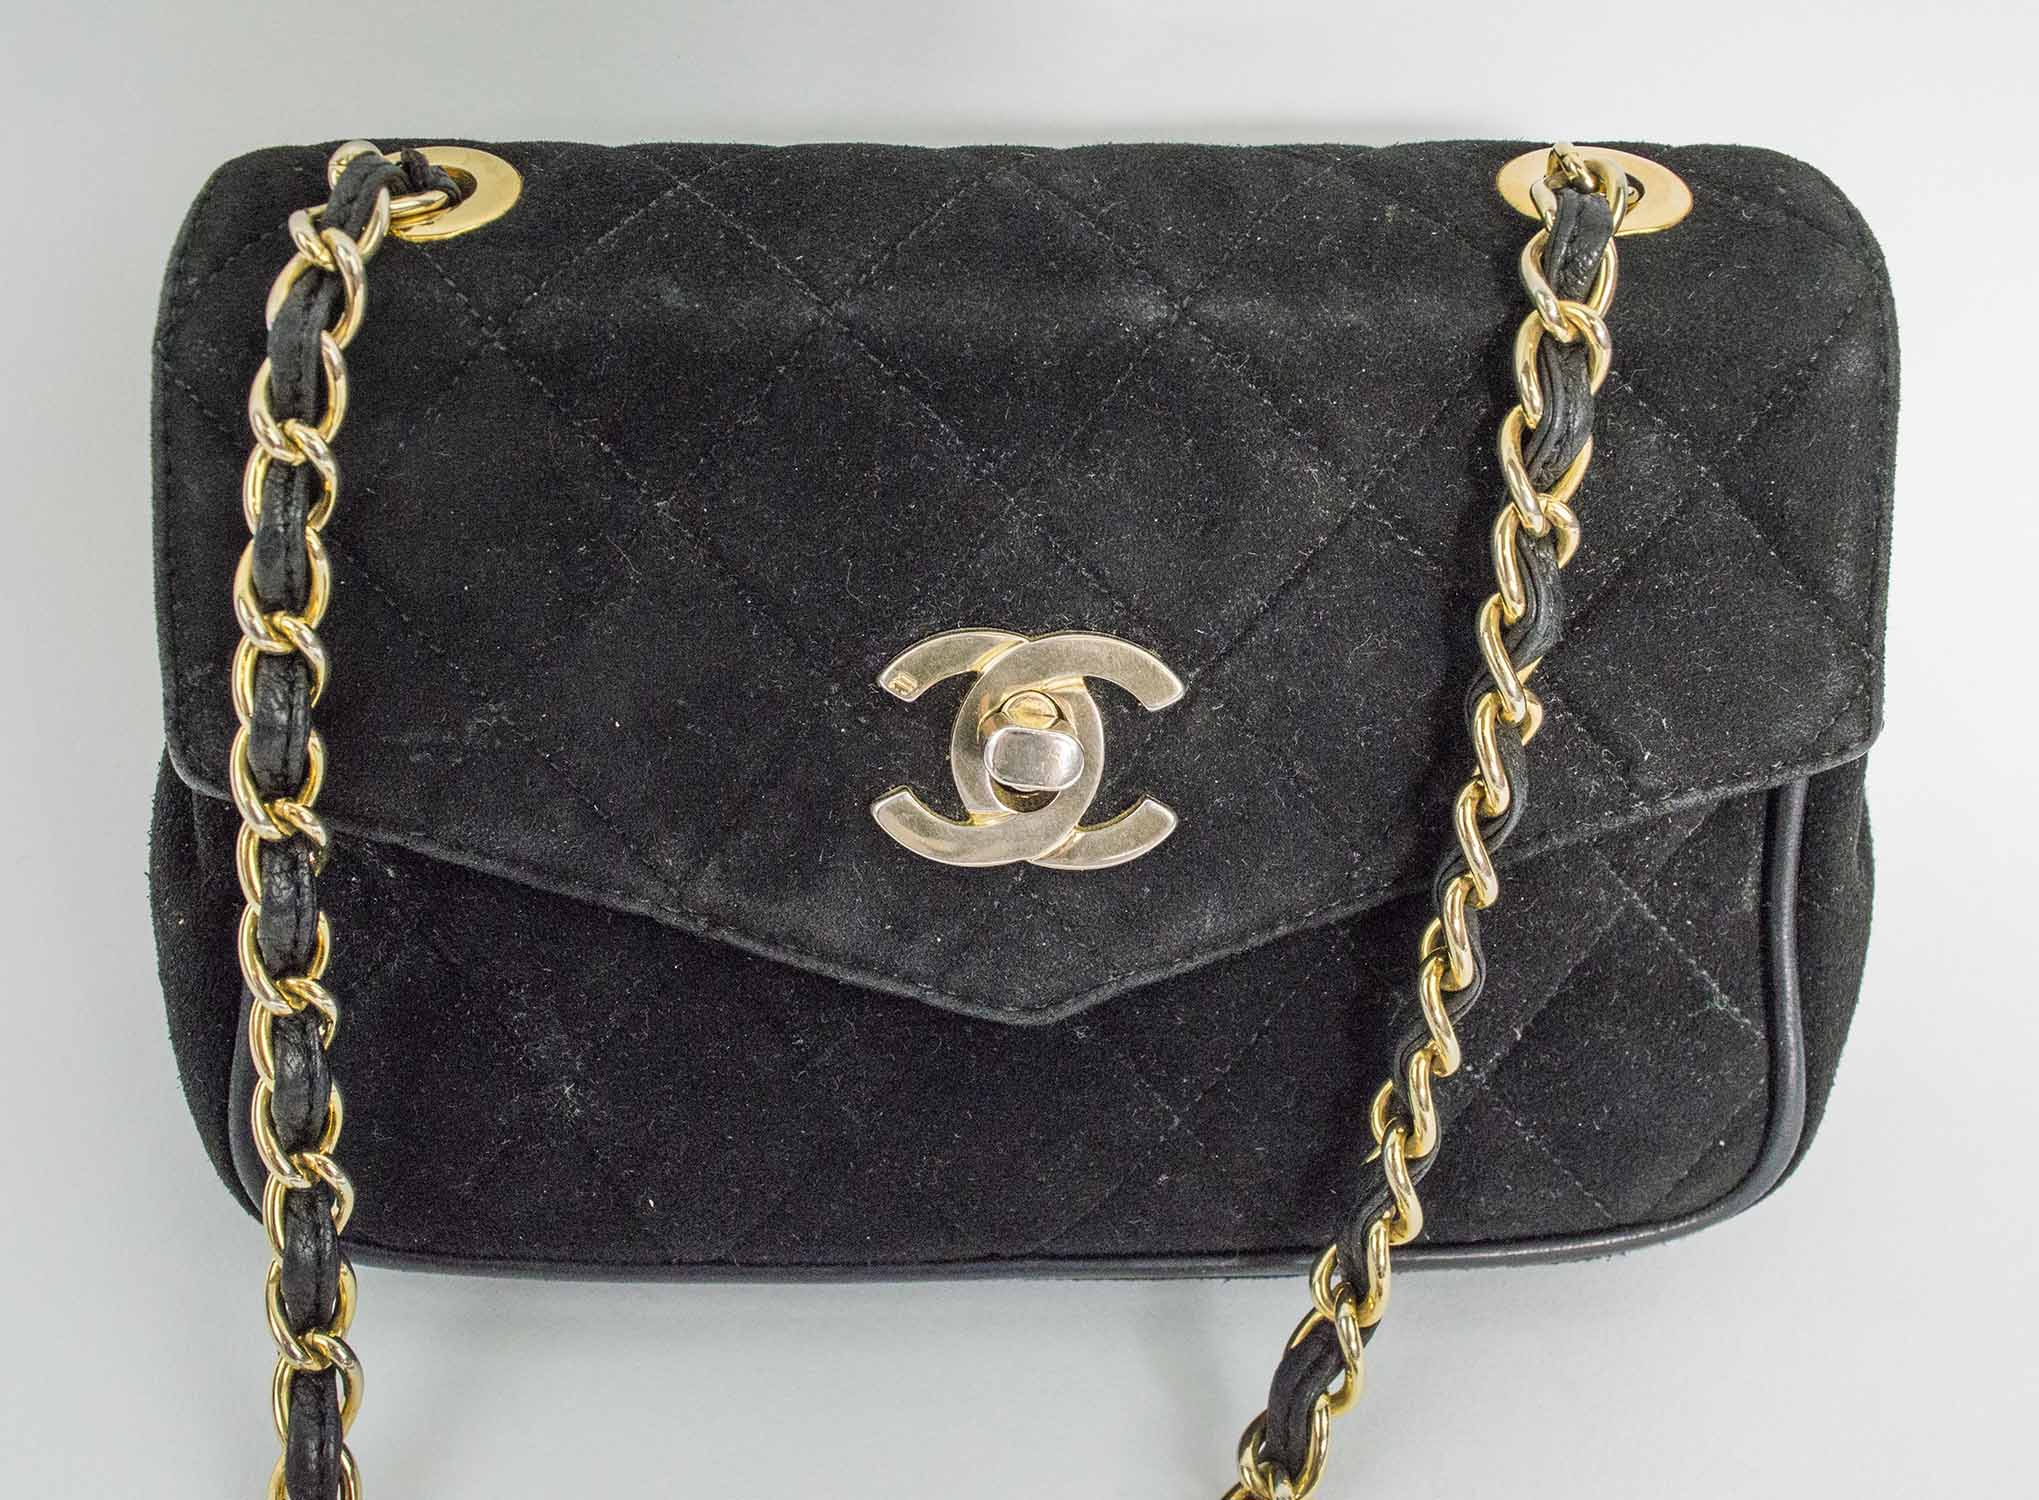 CHANEL VINTAGE SHOULDER/CROSSBODY BAG, iconic diamond quilted black suede  with matching leather interior, interwoven leather and chain strap, 17cm x  11cm H x .